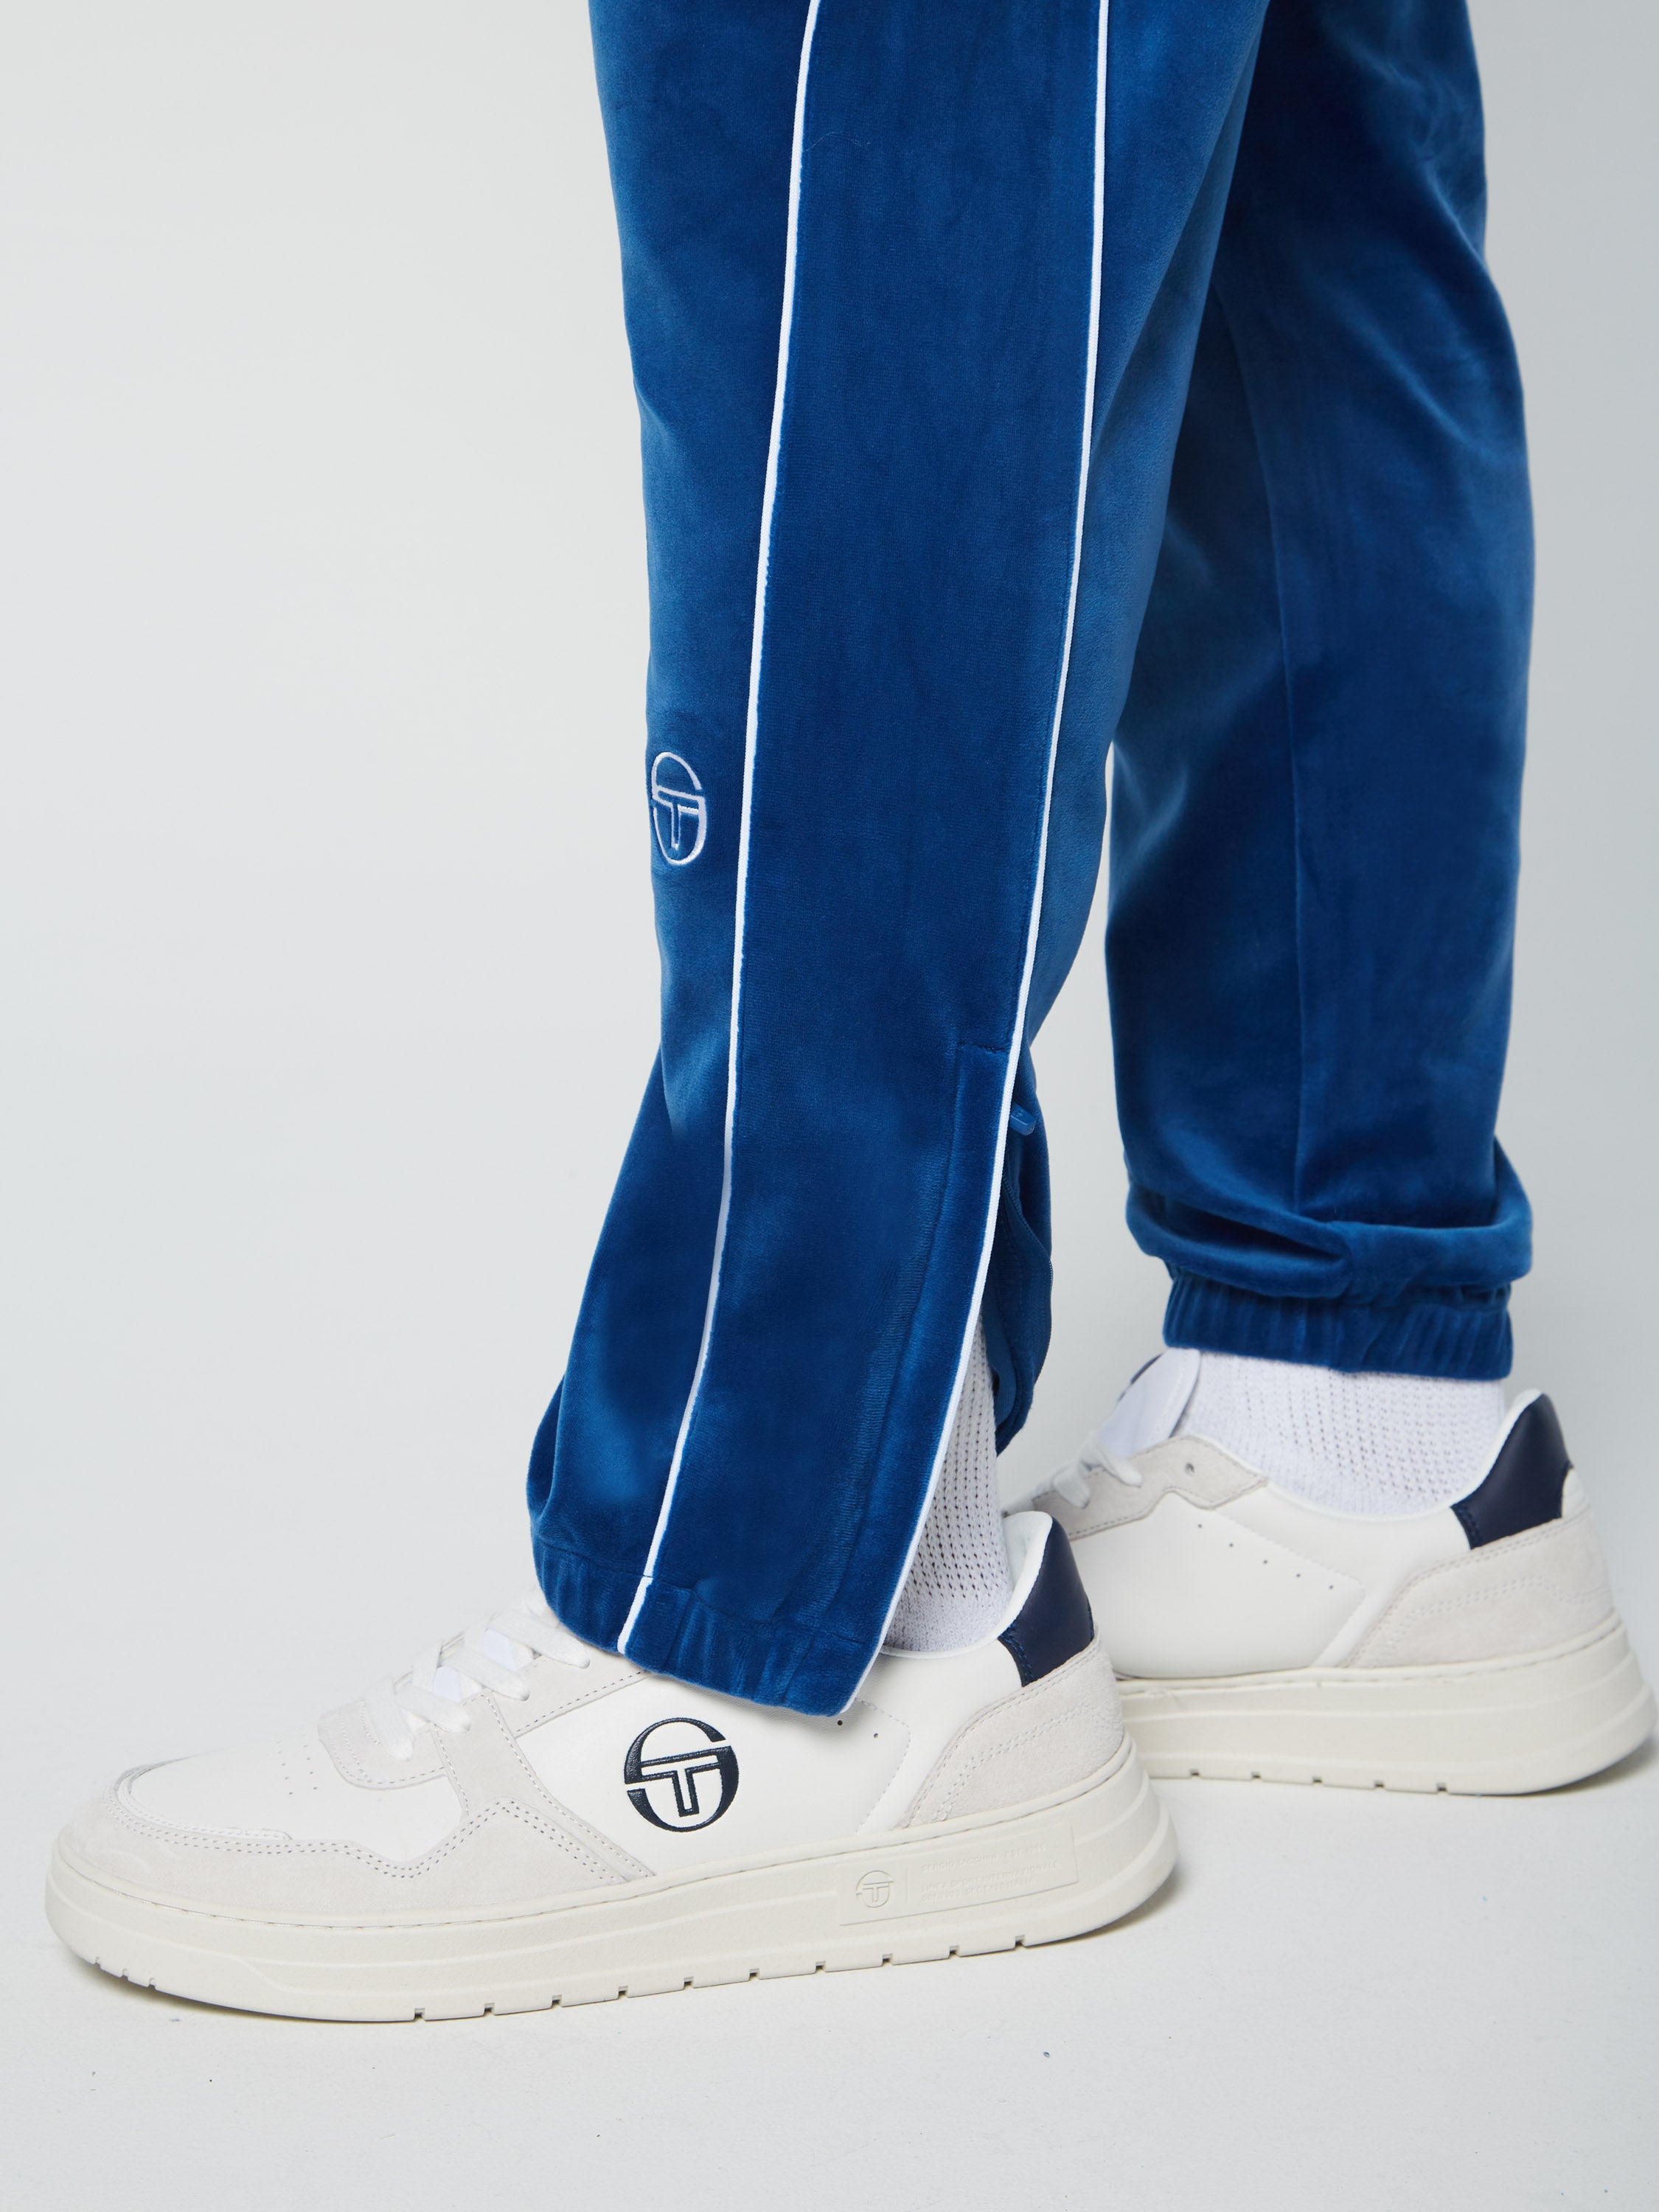 Tracksuits - Jackets & Pants Combo - Official Sergio Tacchini